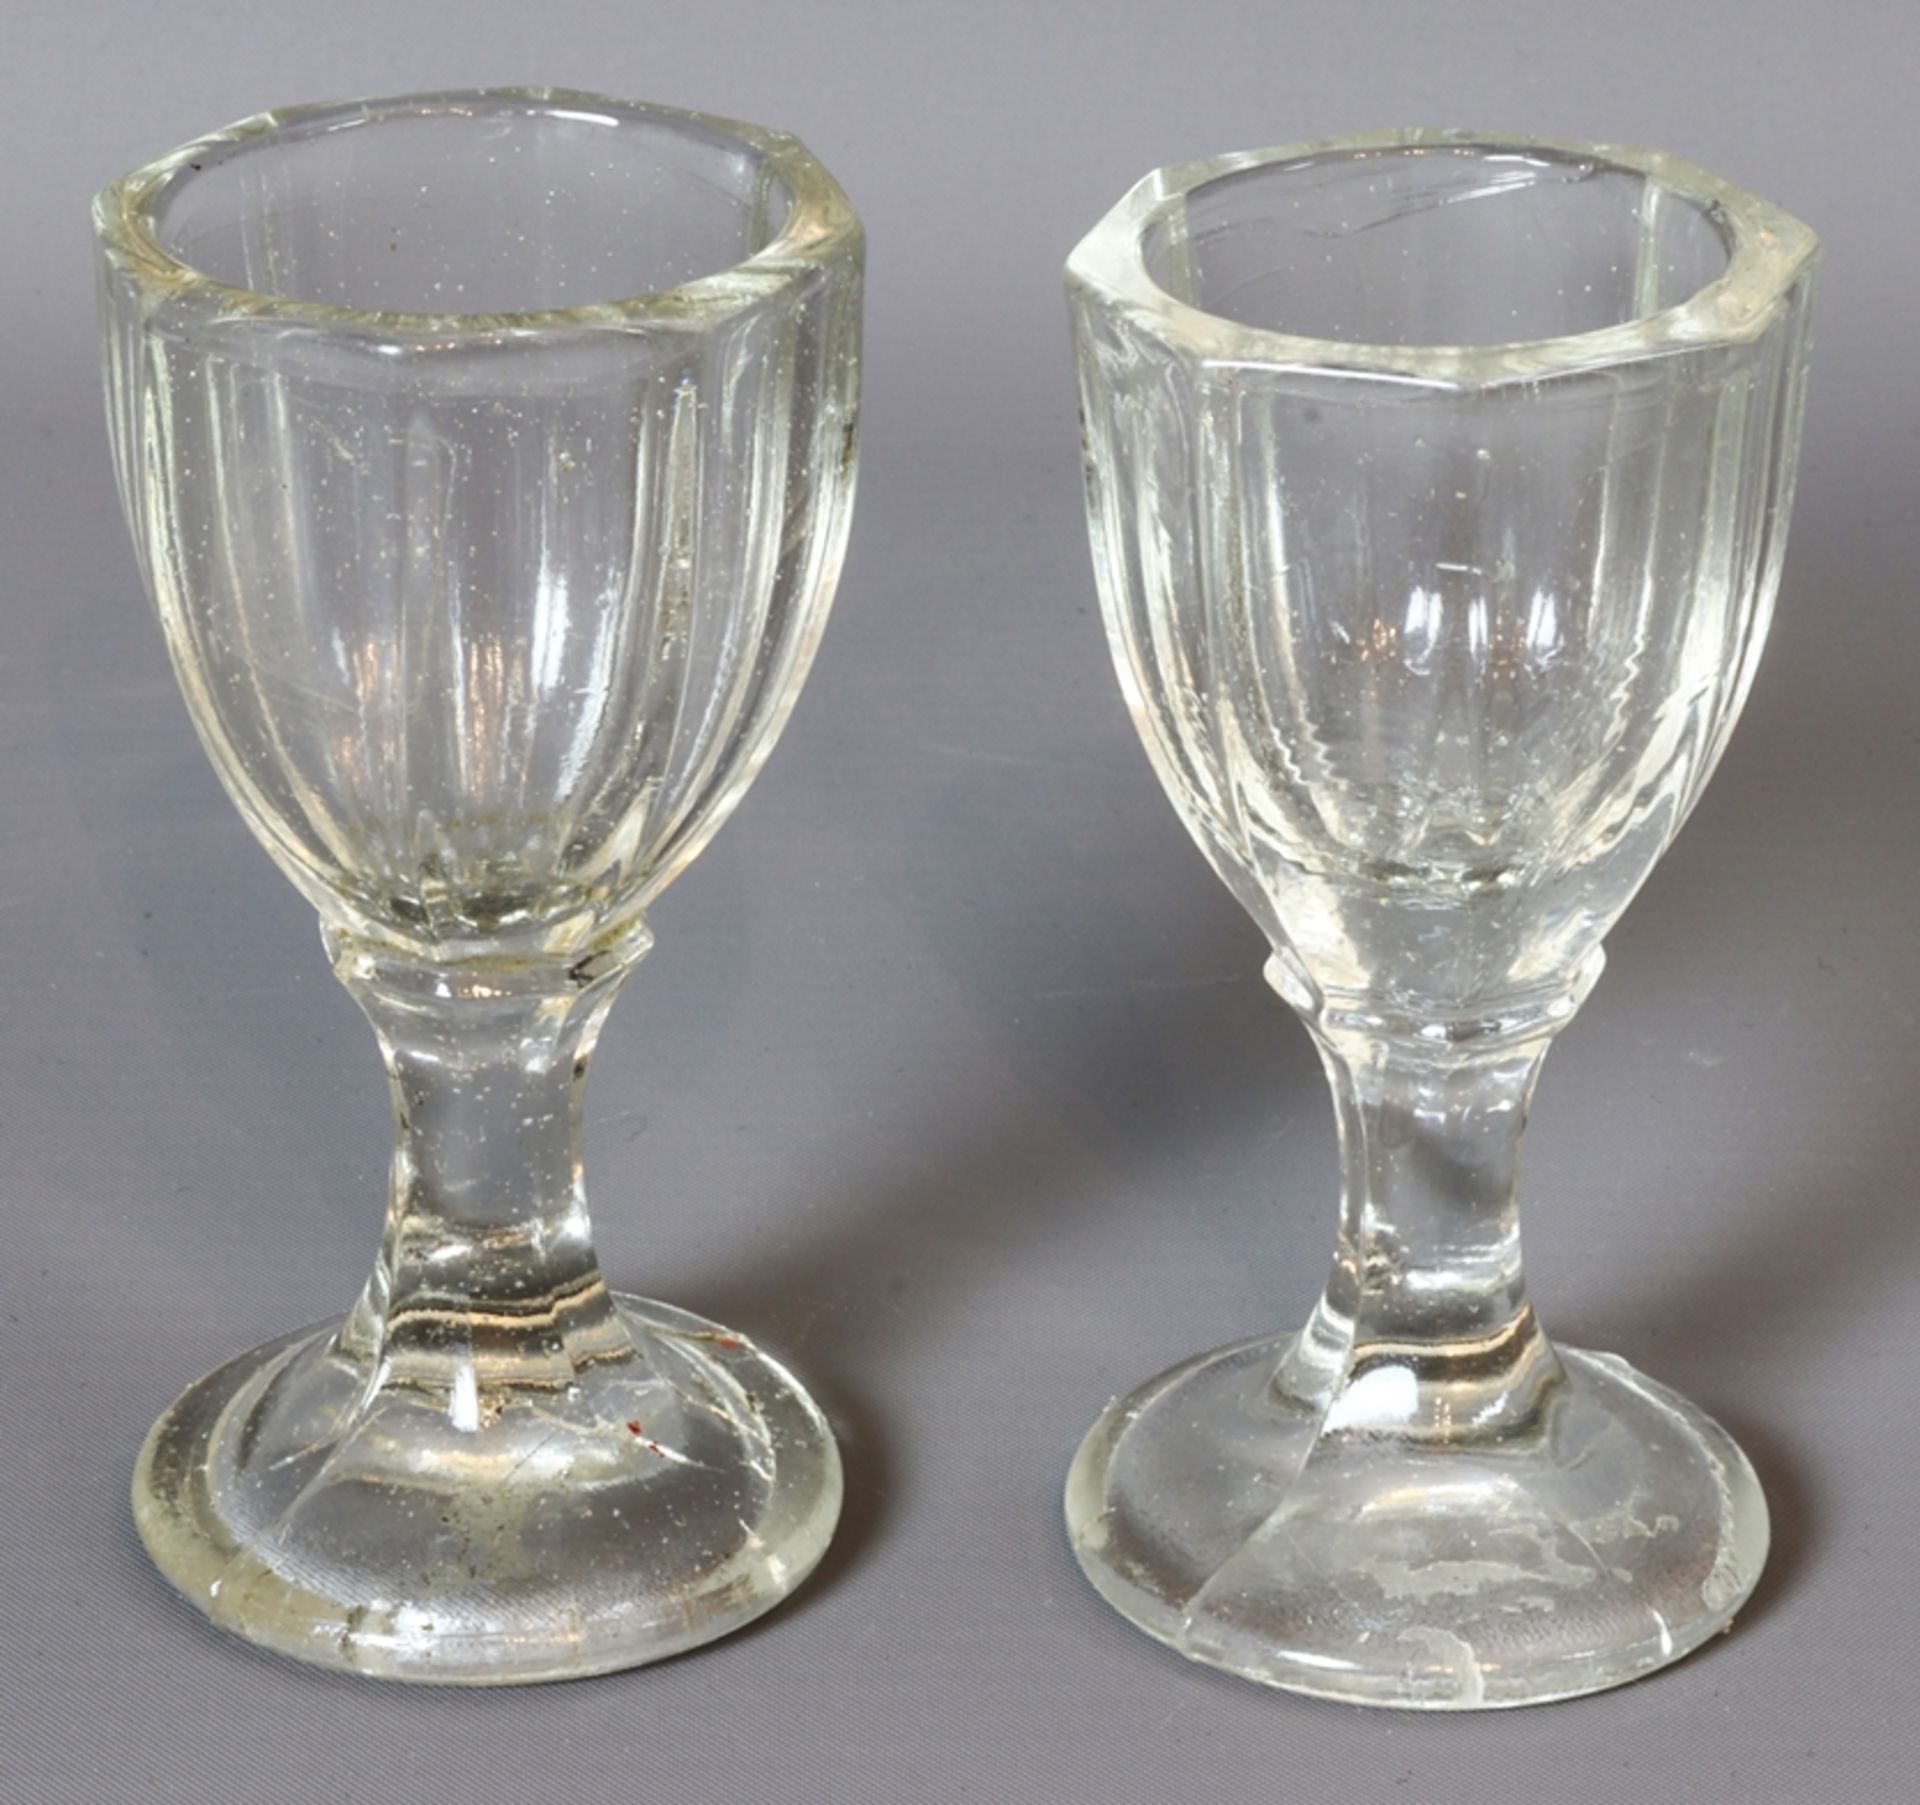 Collection - seven schnapps glasses/pub glasses late 19th/early 20th c., German - Image 2 of 5